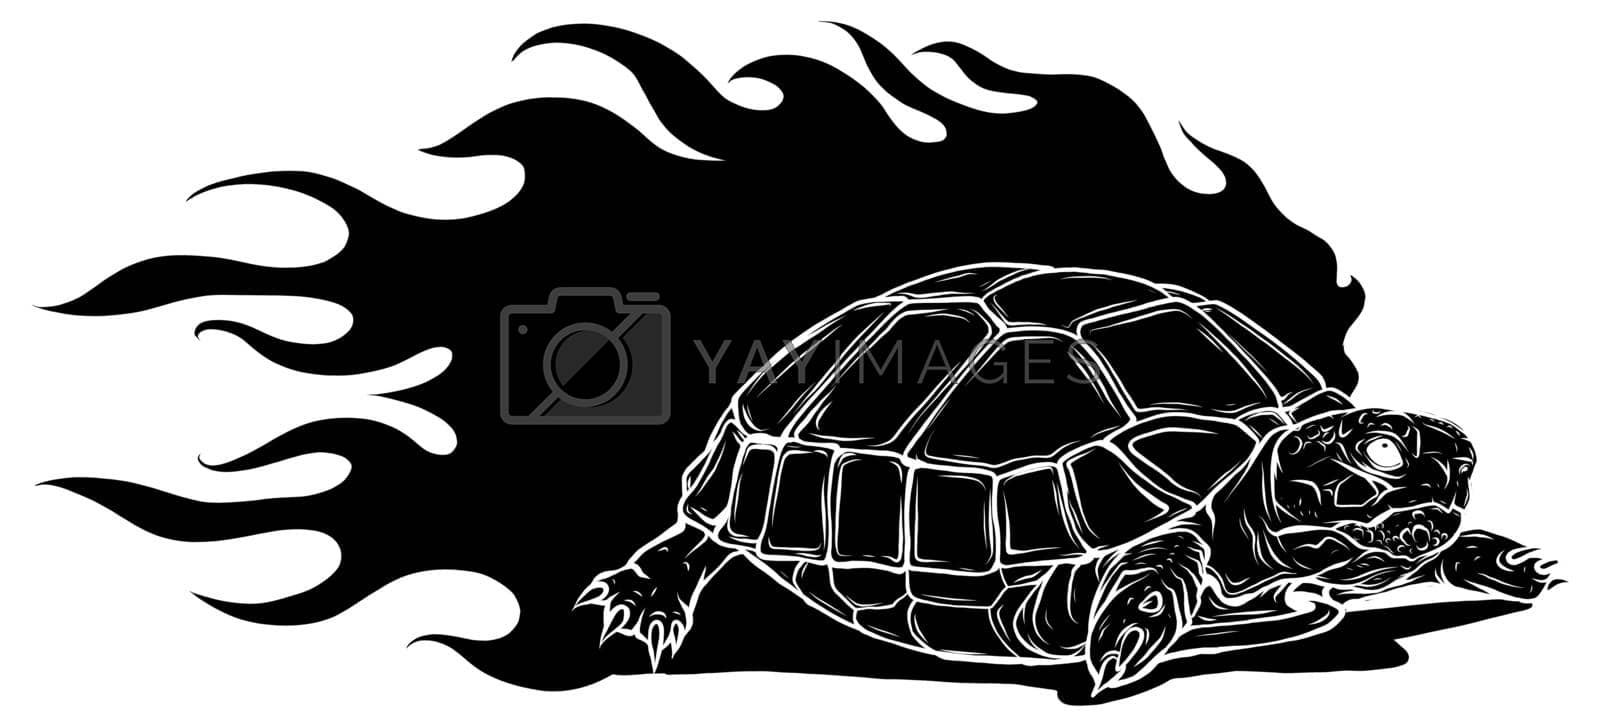 Royalty free image of vector Illustration of black silhouette Sulcata land tortoise design by dean